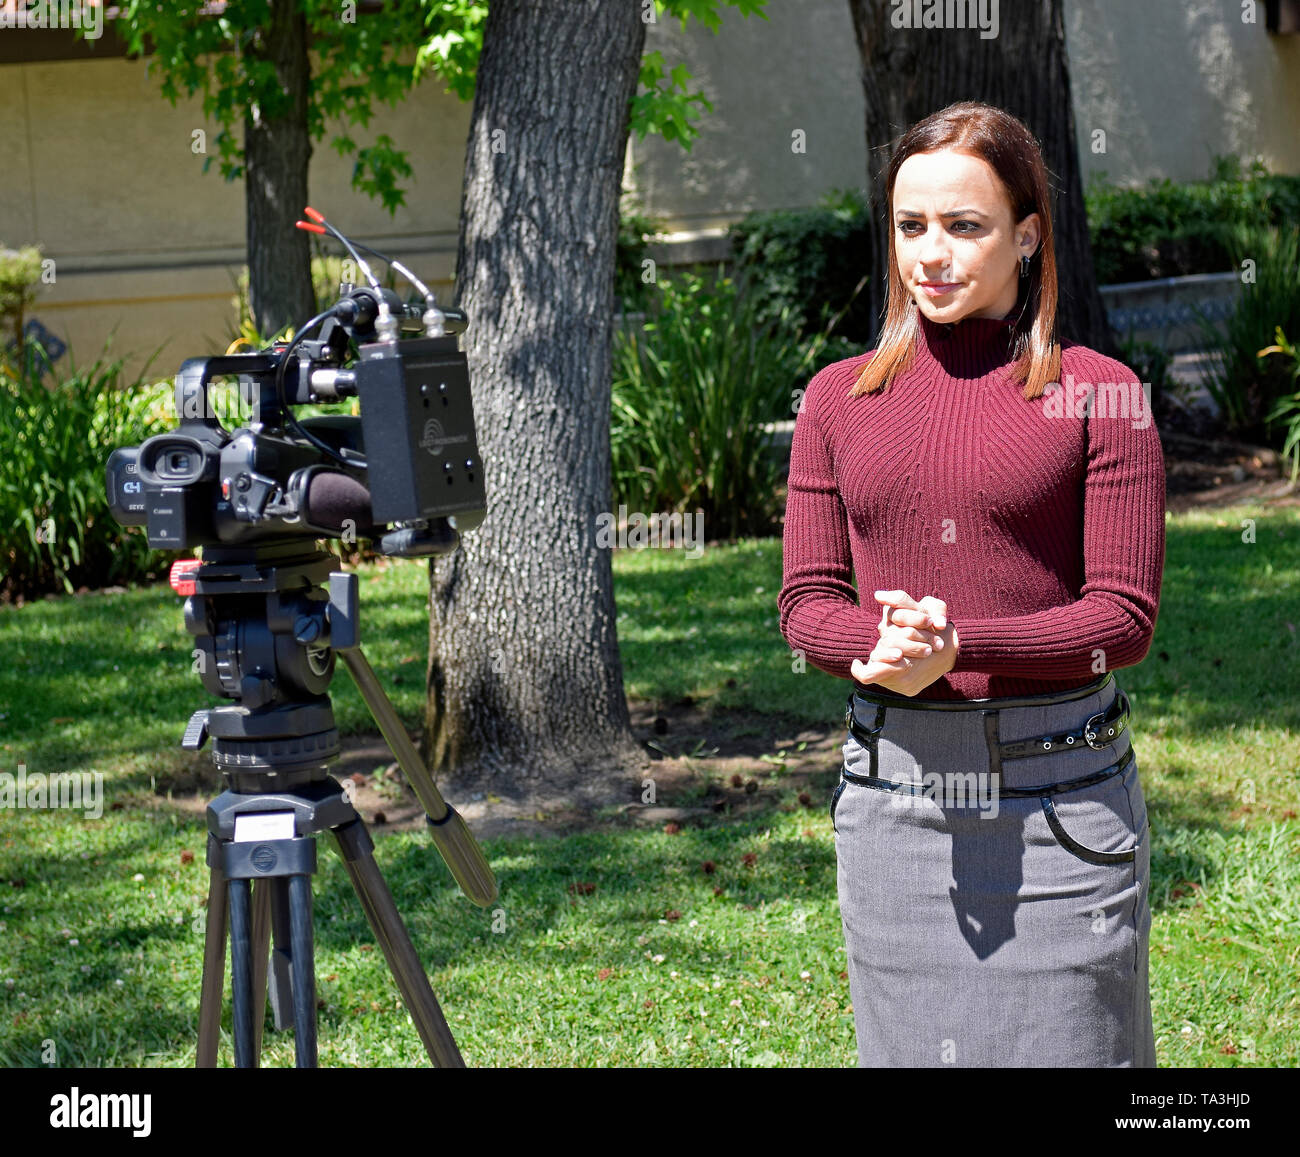 Univision's San Francisco channel 14 reporter covering a news story in Union City California Stock Photo